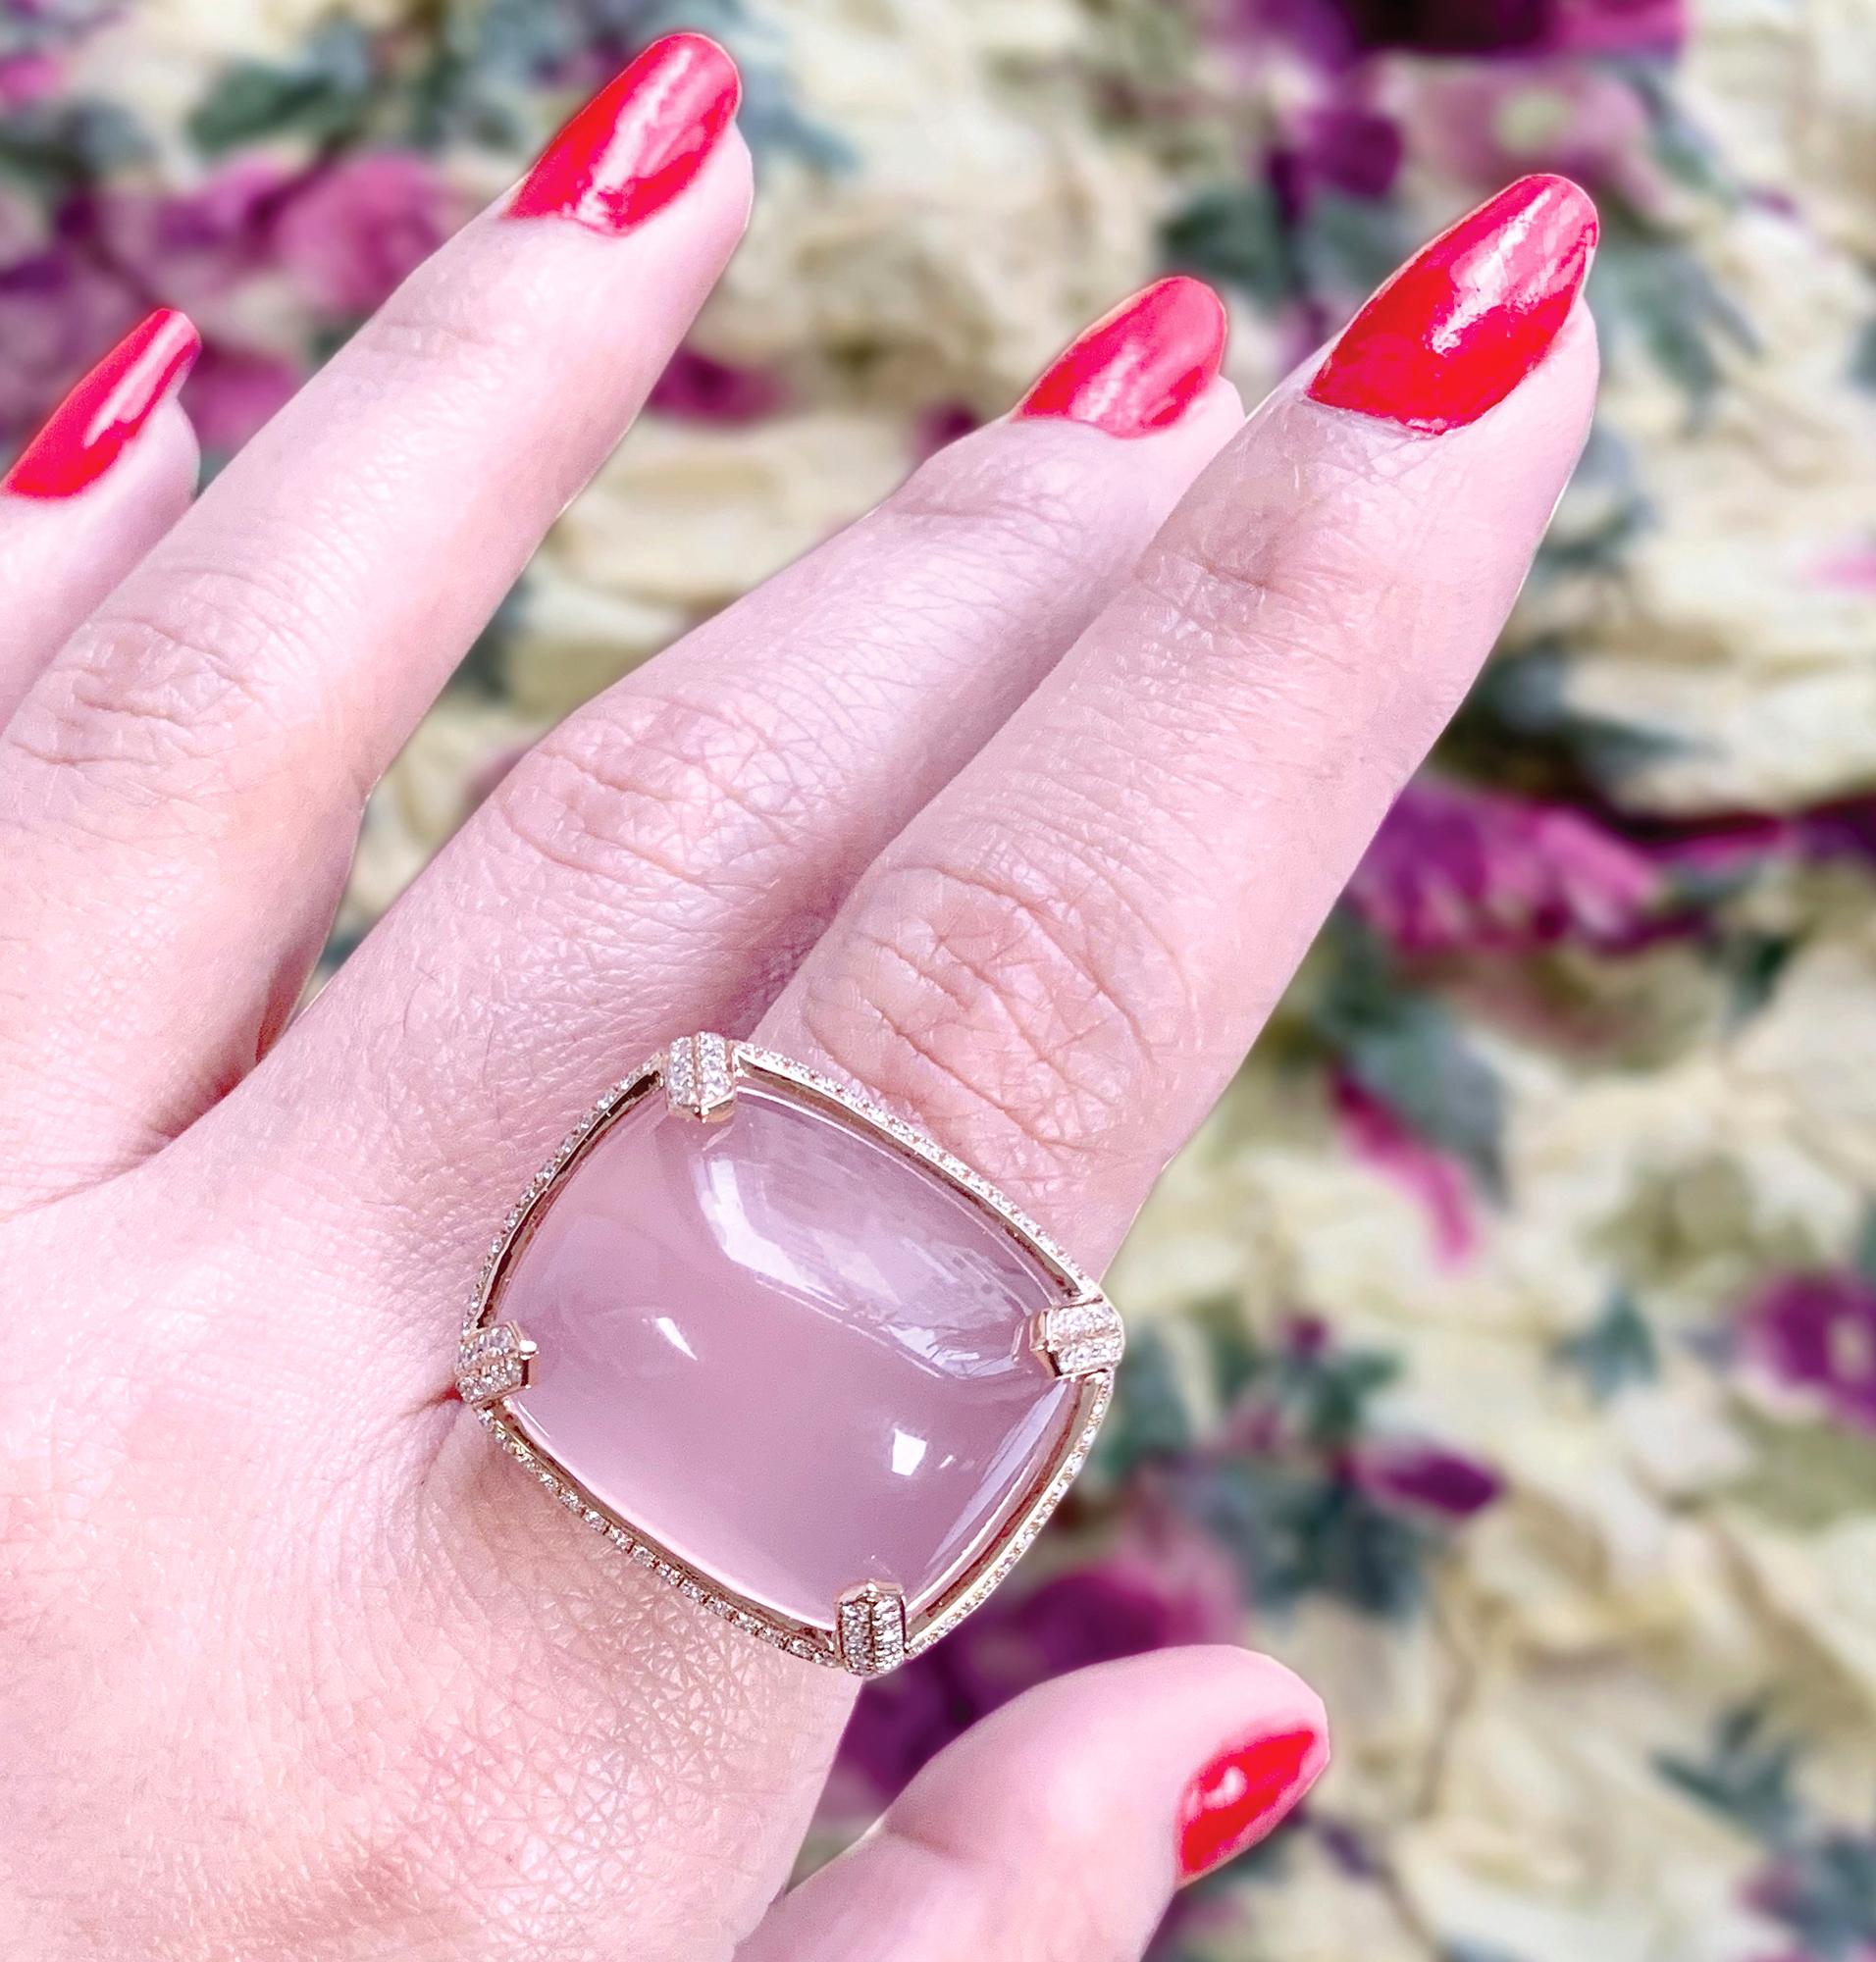 Rose Quartz Cabochon Ring with Diamond in 18K Rose Gold, from 'Rock 'N Roll' Collection. Extensive collection of big and bold pieces. Like the music, this Rock ‘n Roll collection is electric in color and very stimulating to the eye. These exciting